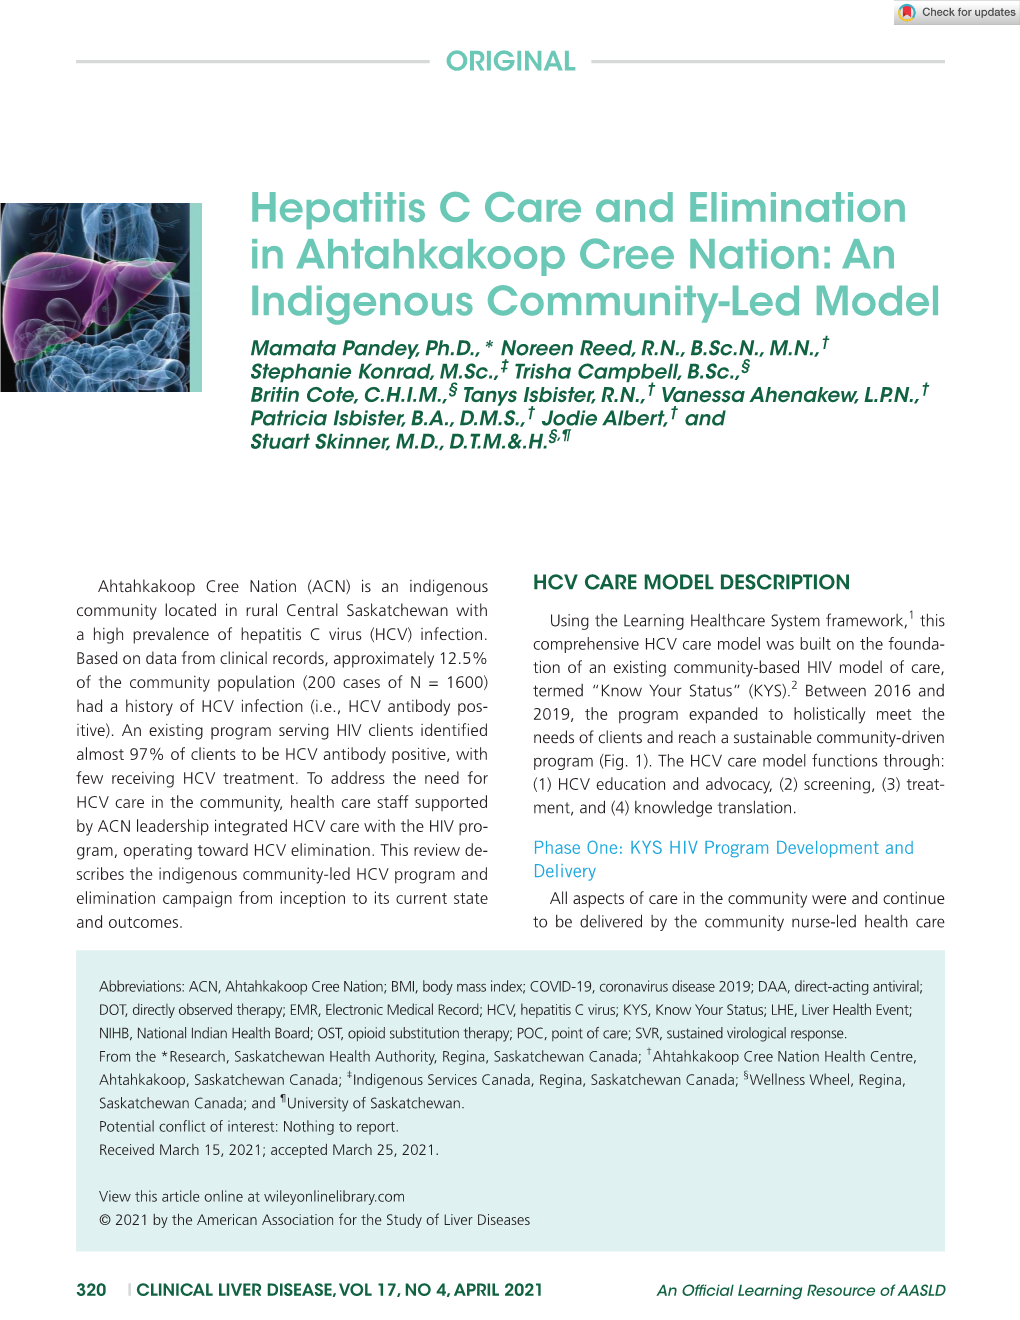 Hepatitis C Care and Elimination in Ahtahkakoop Cree Nation: An